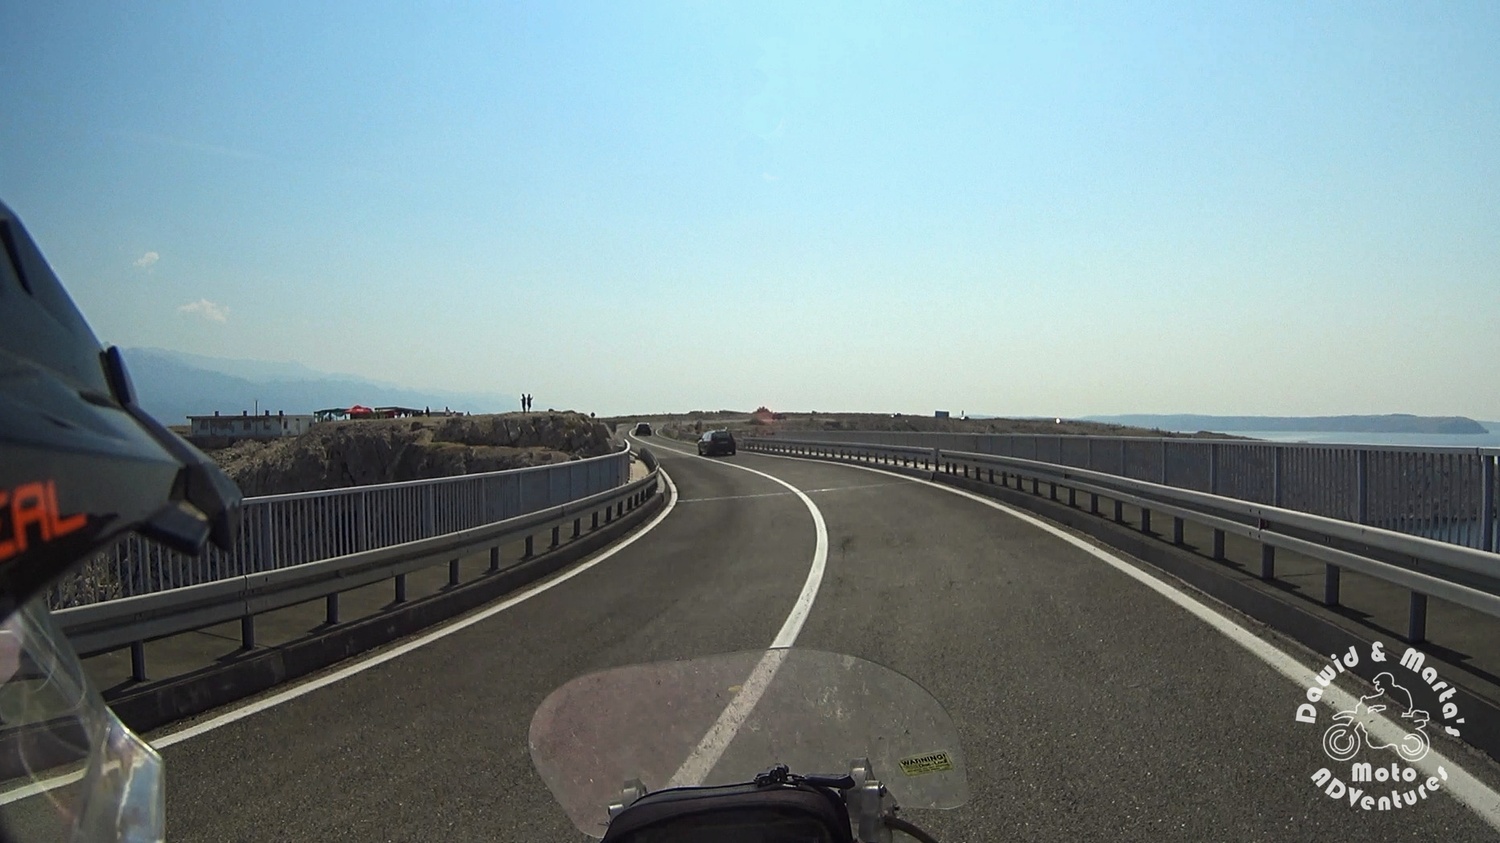 Pag bridge from a driver perspective